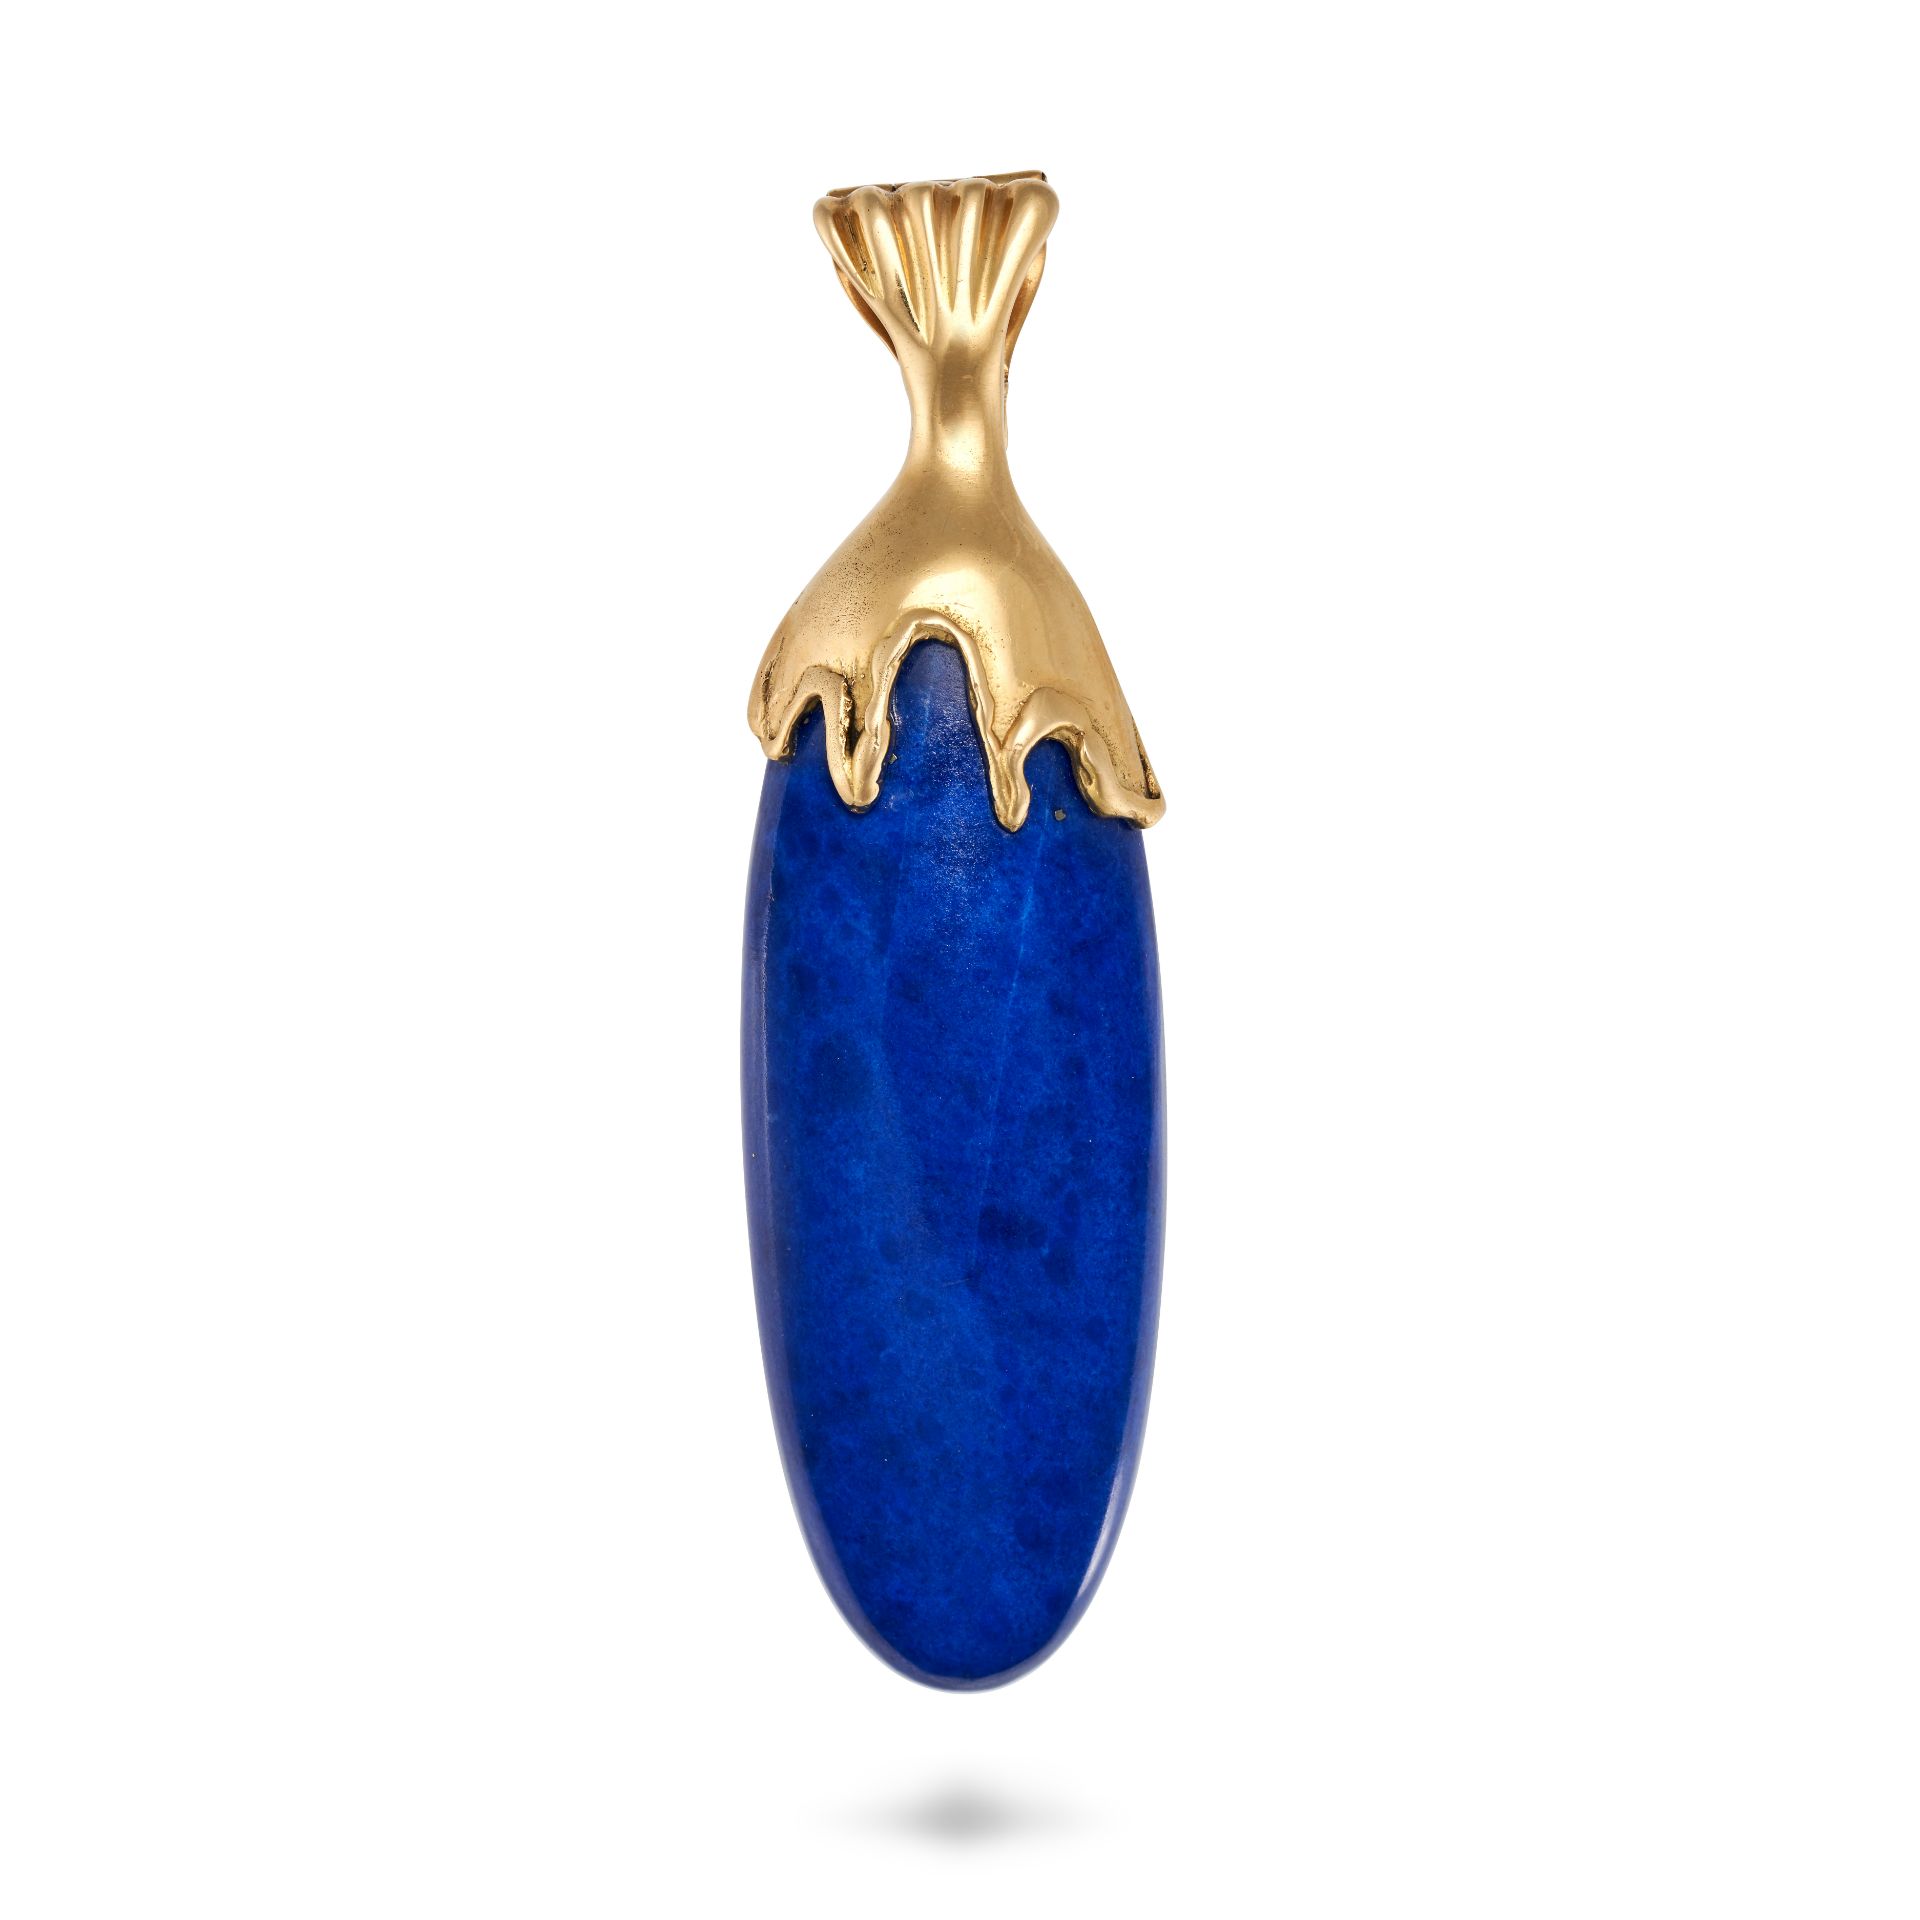 A LAPIS LAZULI PENDANT in 18ct yellow gold, set with a cabochon lapis lazuli in a stylised gold s...